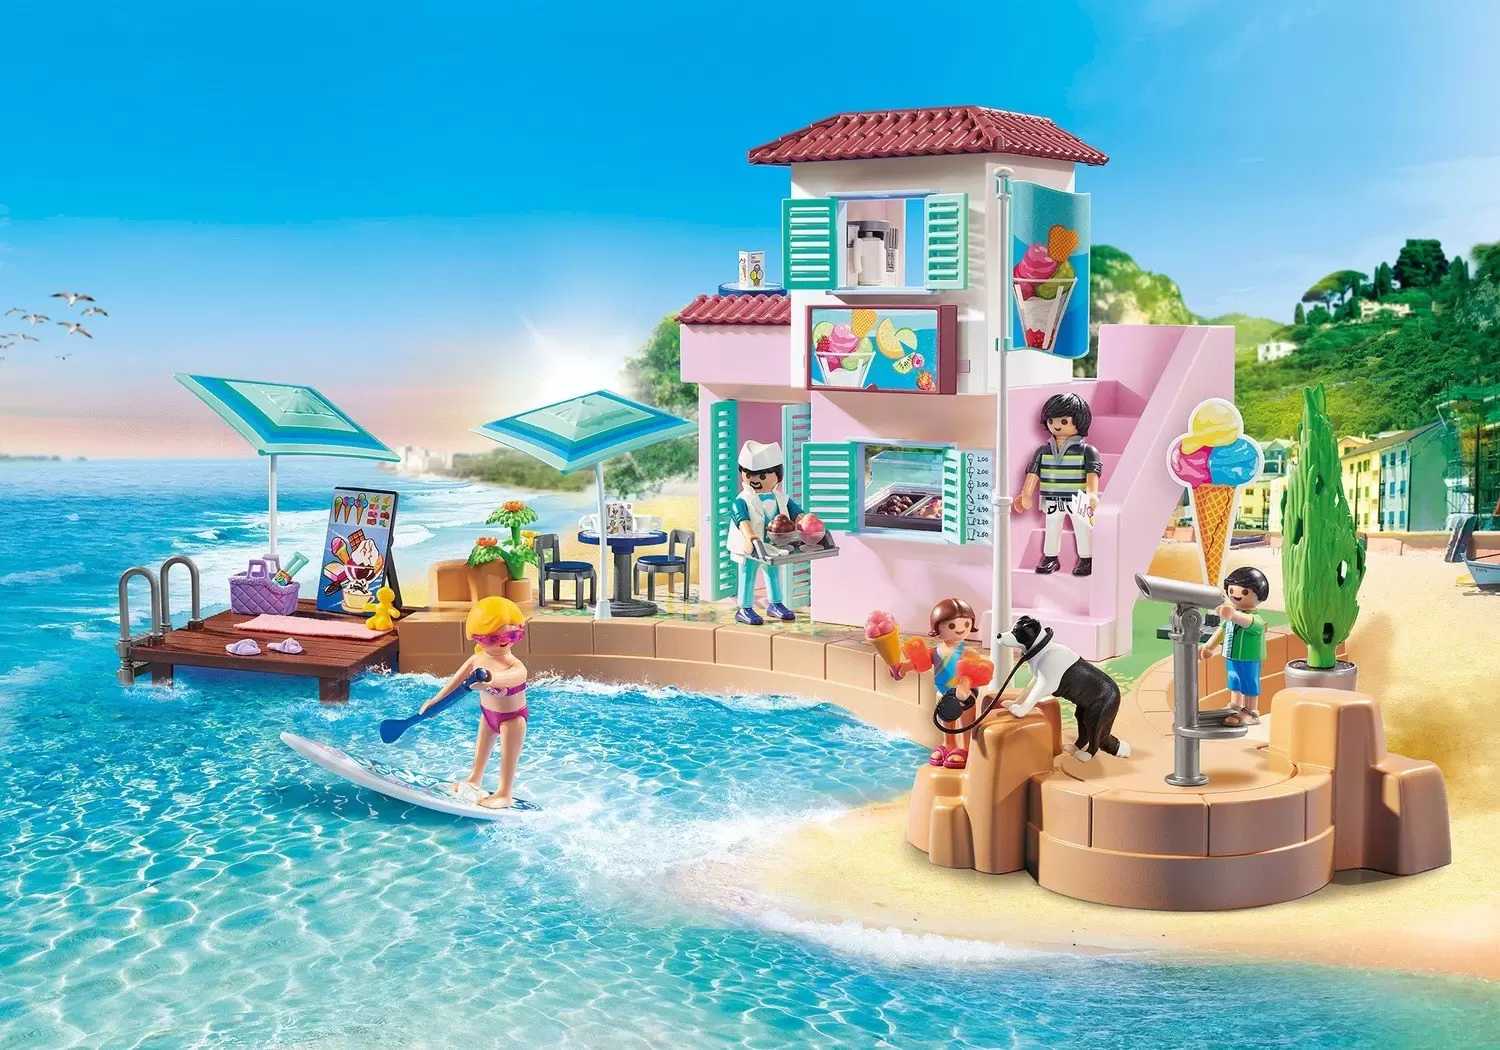 Playmobil on Hollidays - Ice Cream Shop at the Harbour